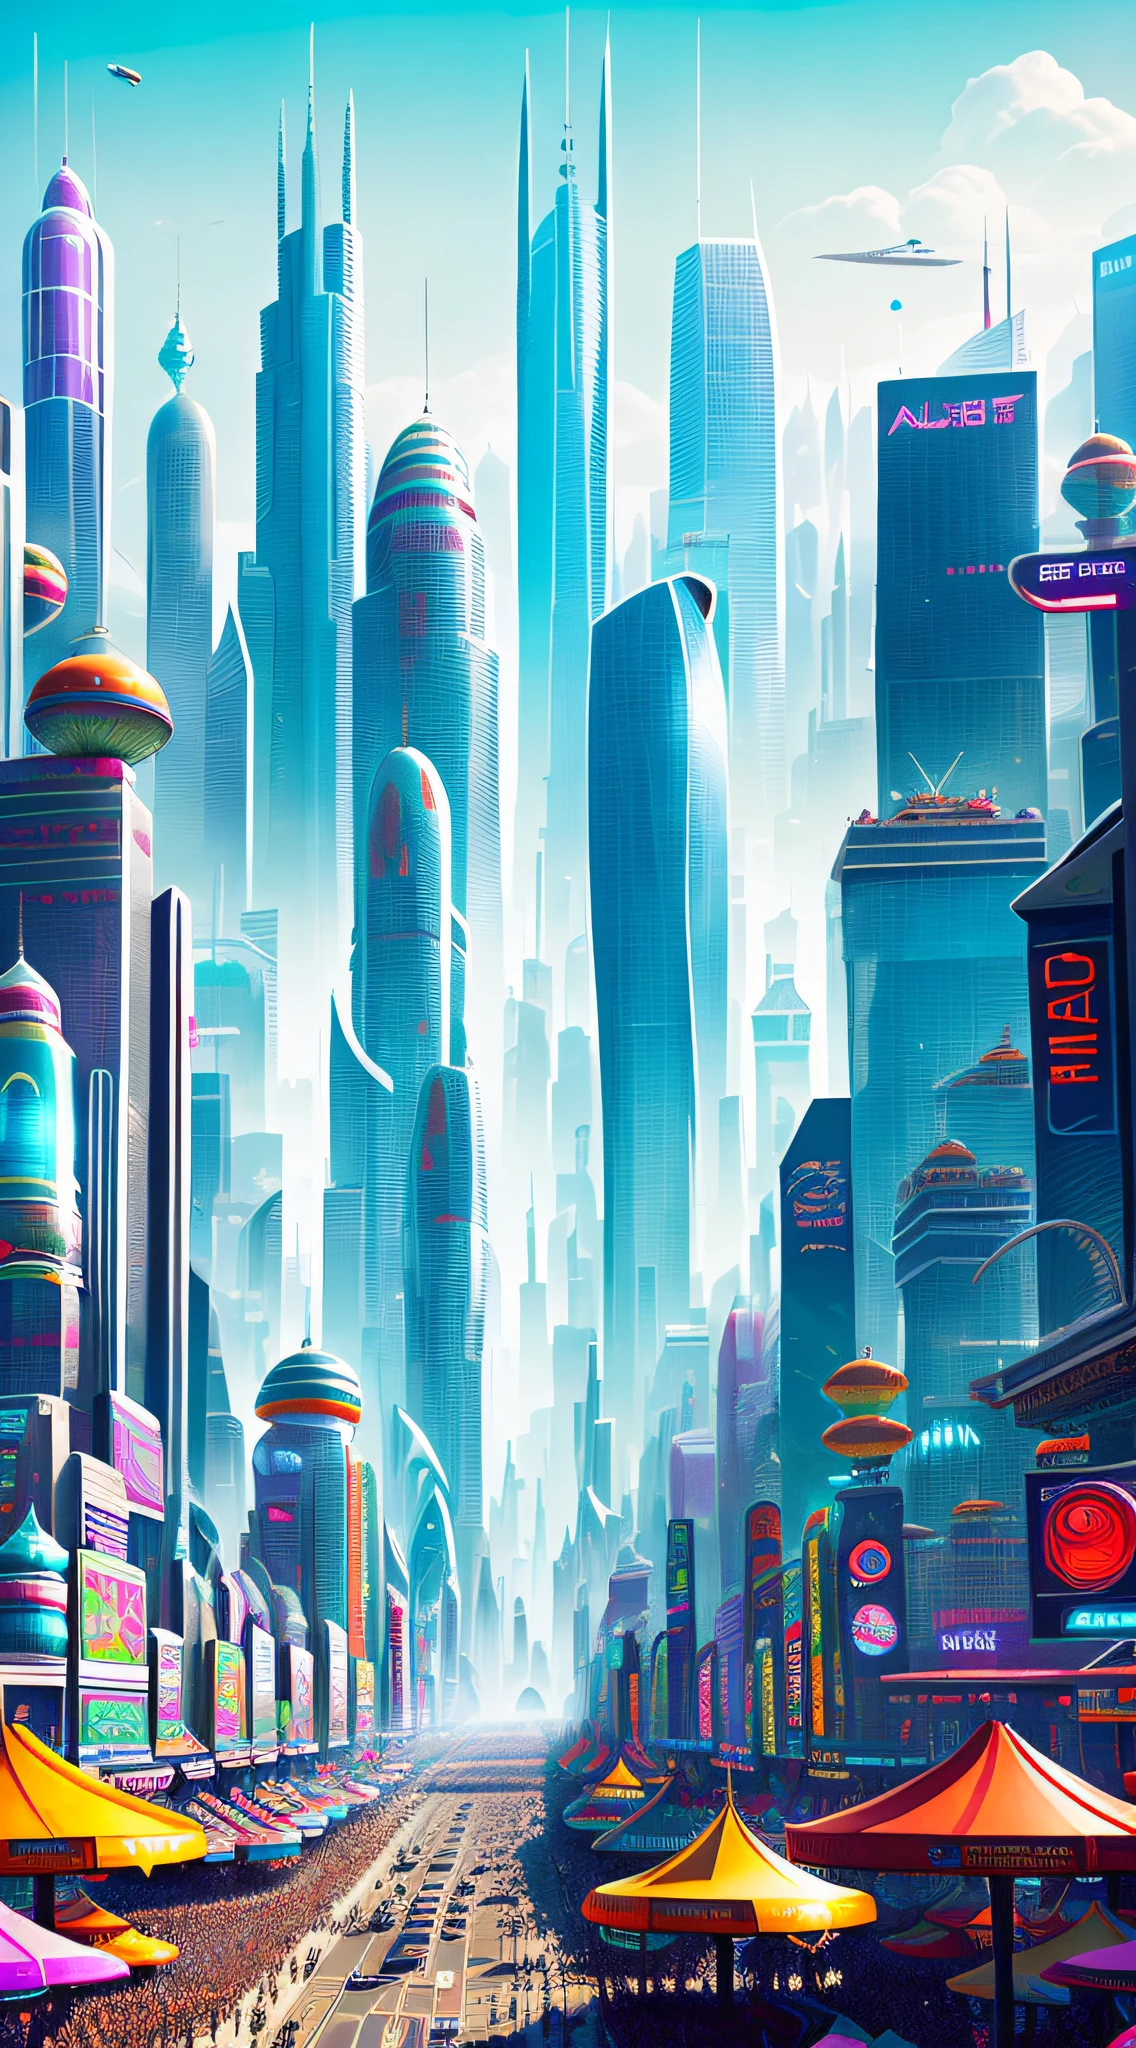 A bustling futuristic cityscape with floating skyscrapers and hovercars zooming between them. In the center of the city is a massive outdoor marketplace, filled with colorful stalls selling a wide variety of bizarre alien goods. The overall tone is lighthearted and whimsical, by Justin Maller